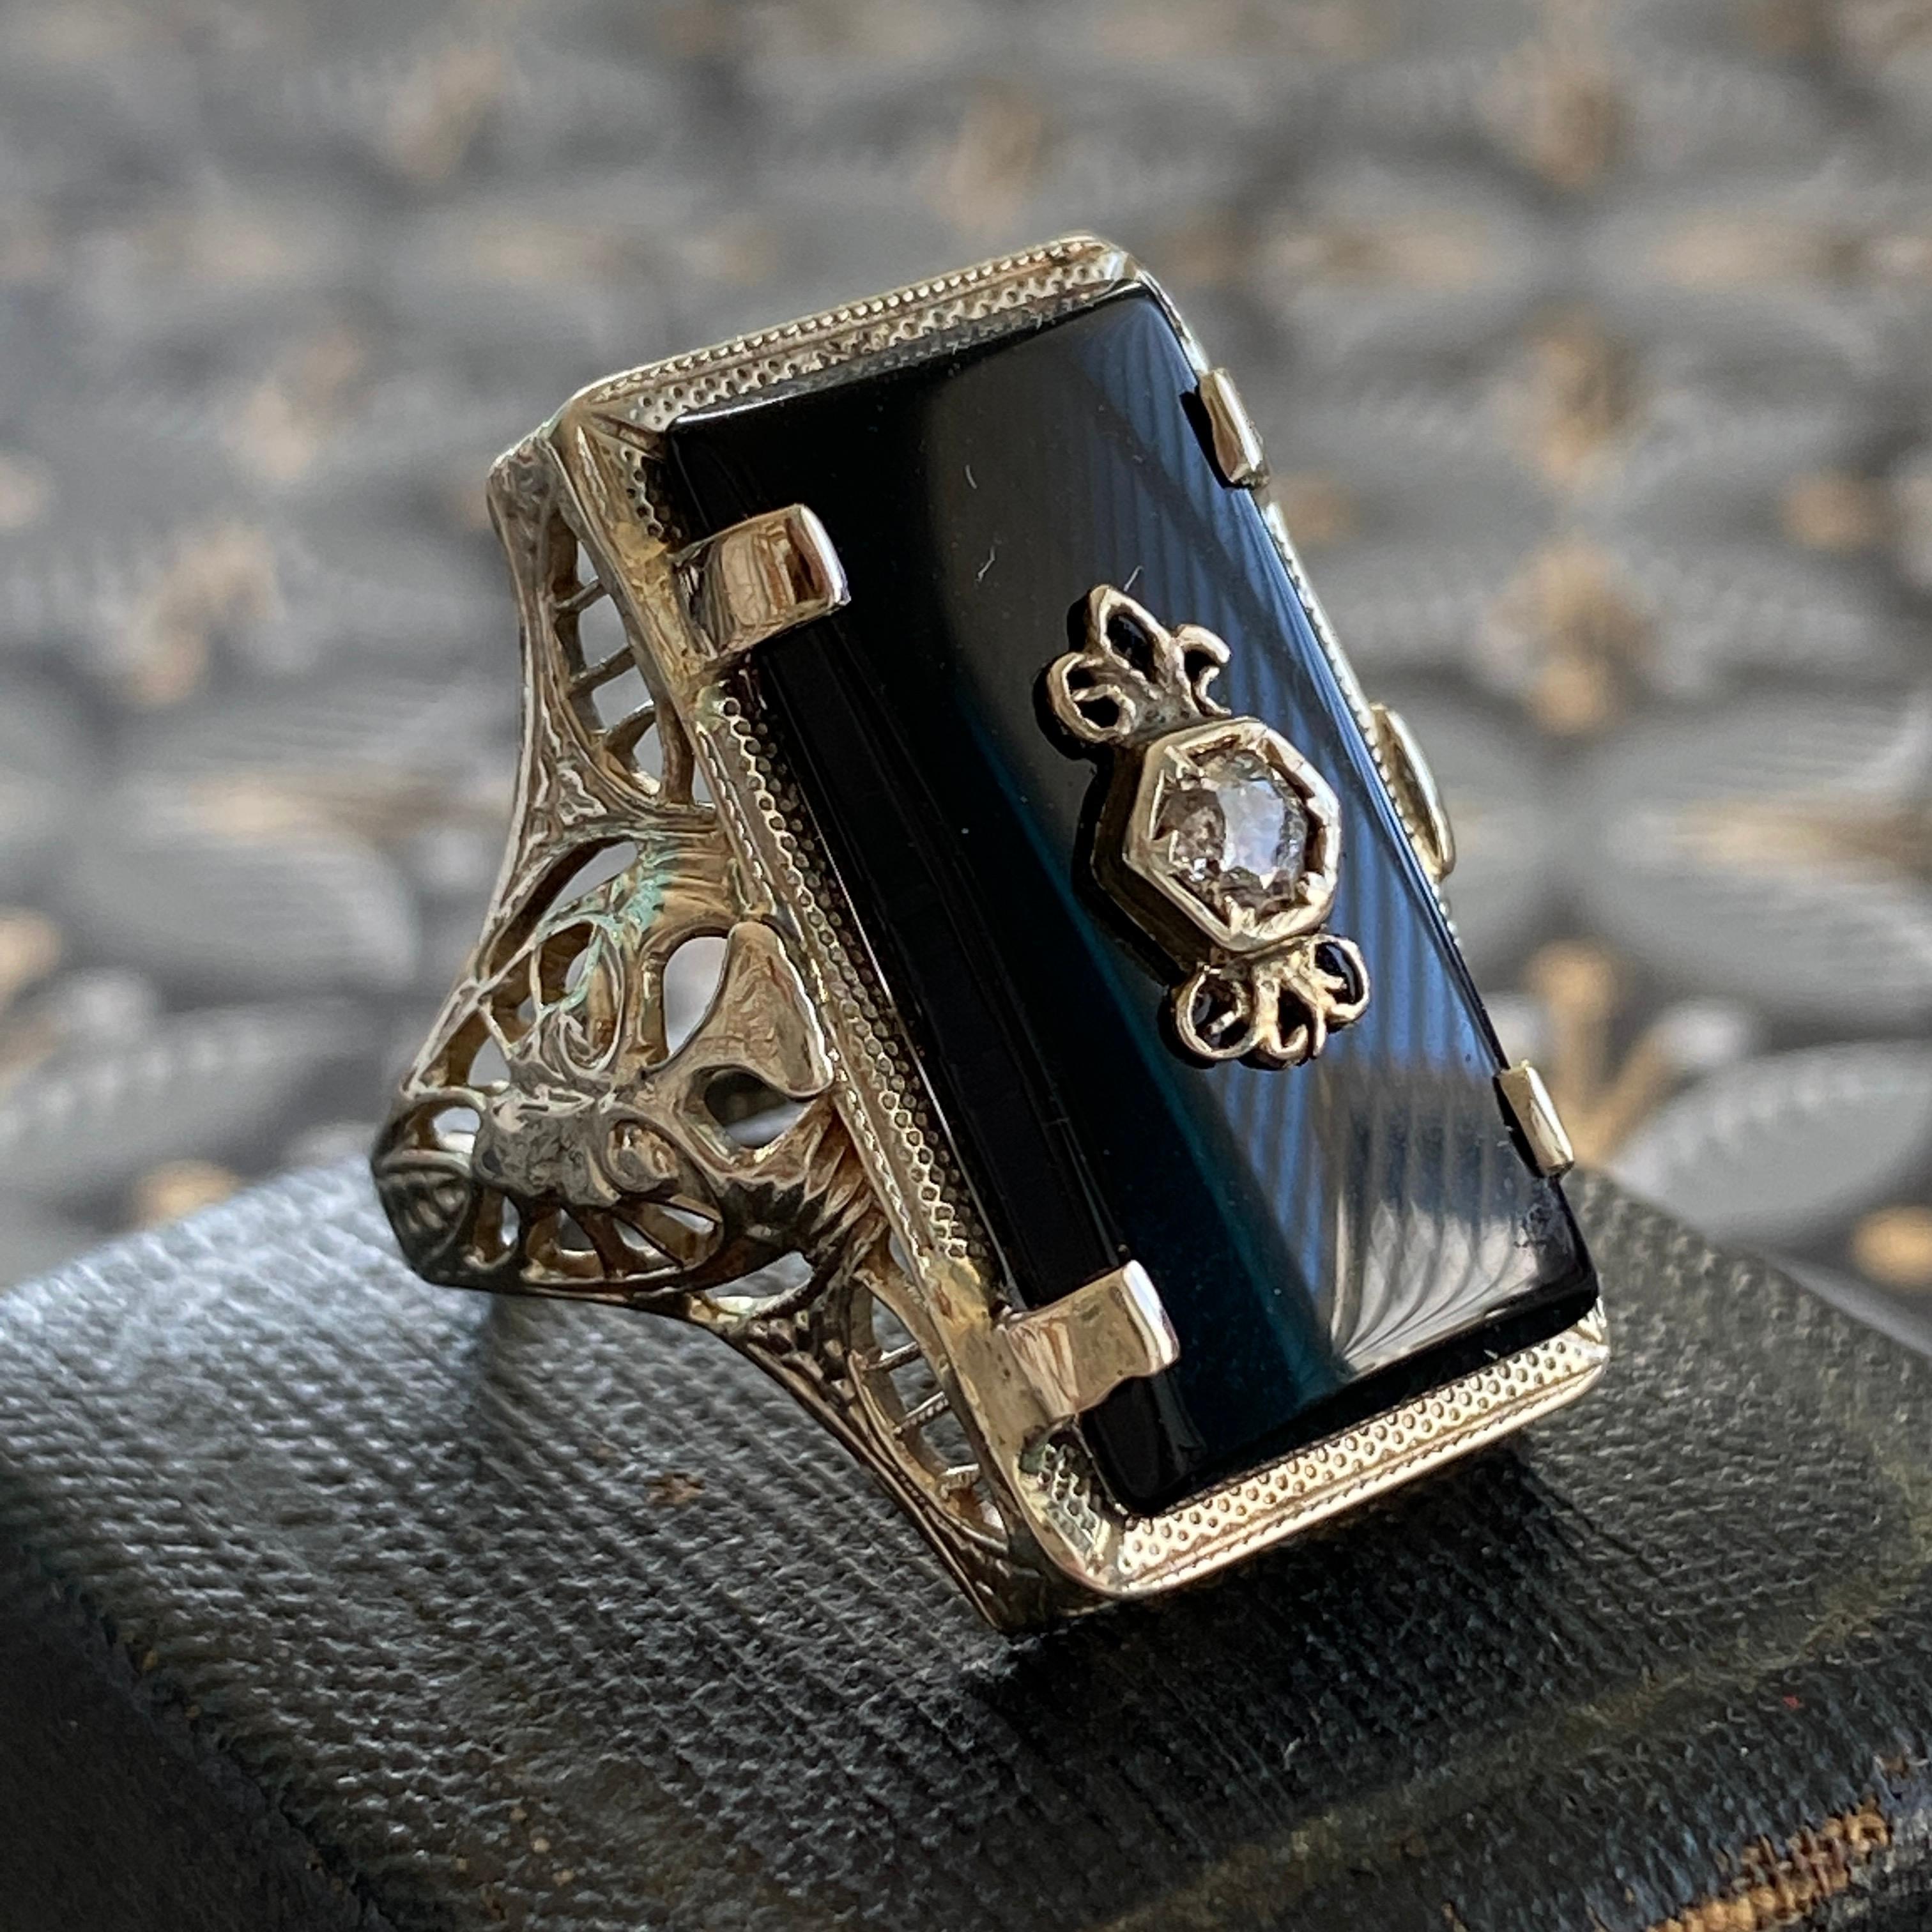 Details:
Beautiful vintage onyx set in 14K white gold filigree. The filigree has a lovely art nouveau feel. The onyx is a very rich, deep black, and a rose cut Diamond is set in the center of the onyx stone. Hallmarks on the interior band read P&KCC